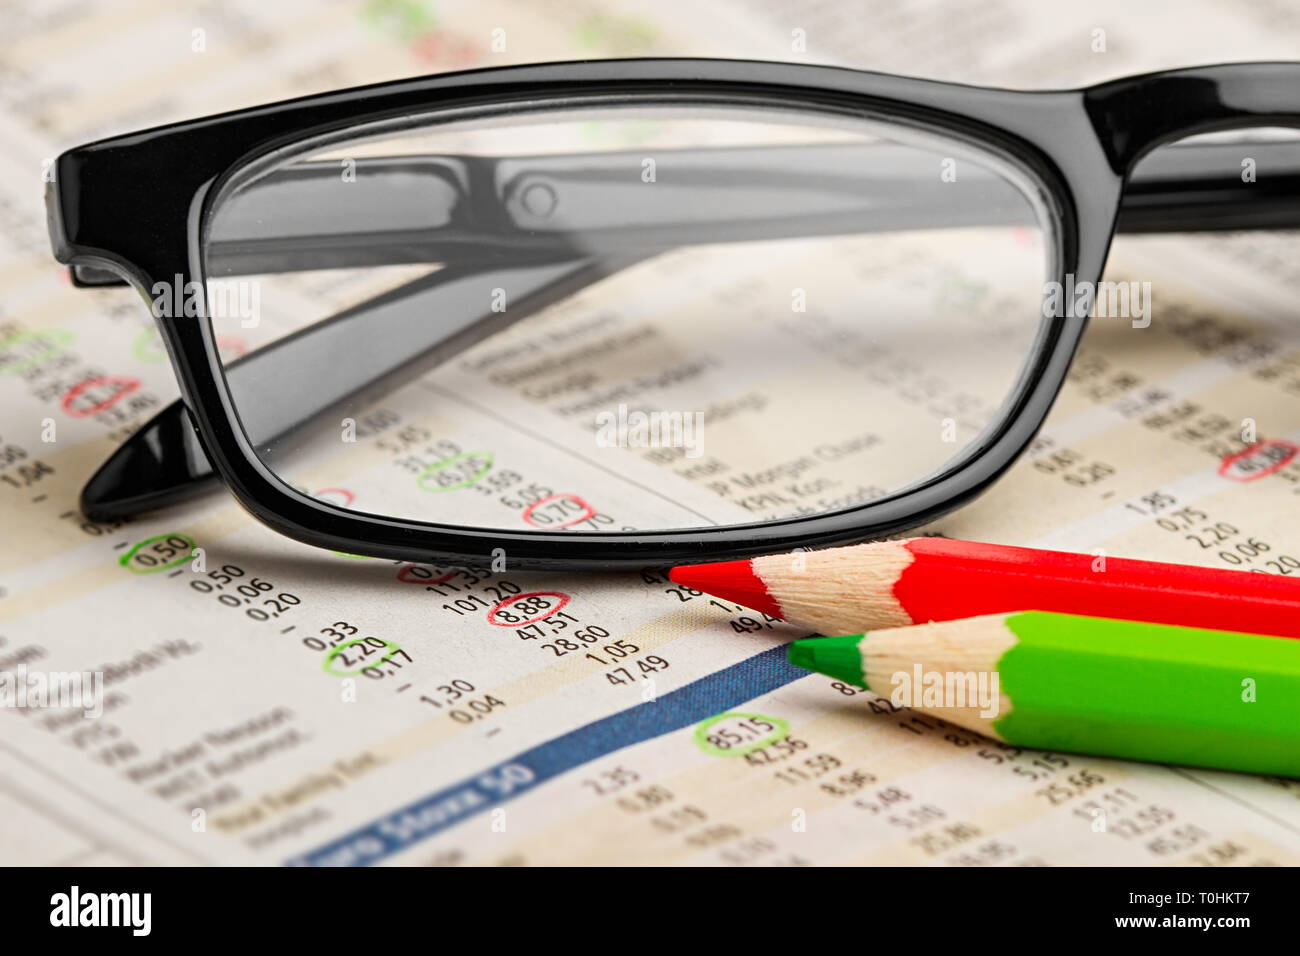 glasses red green pen pencil on newspaper with stock market exchange data chart finance business concept cash background Stock Photo